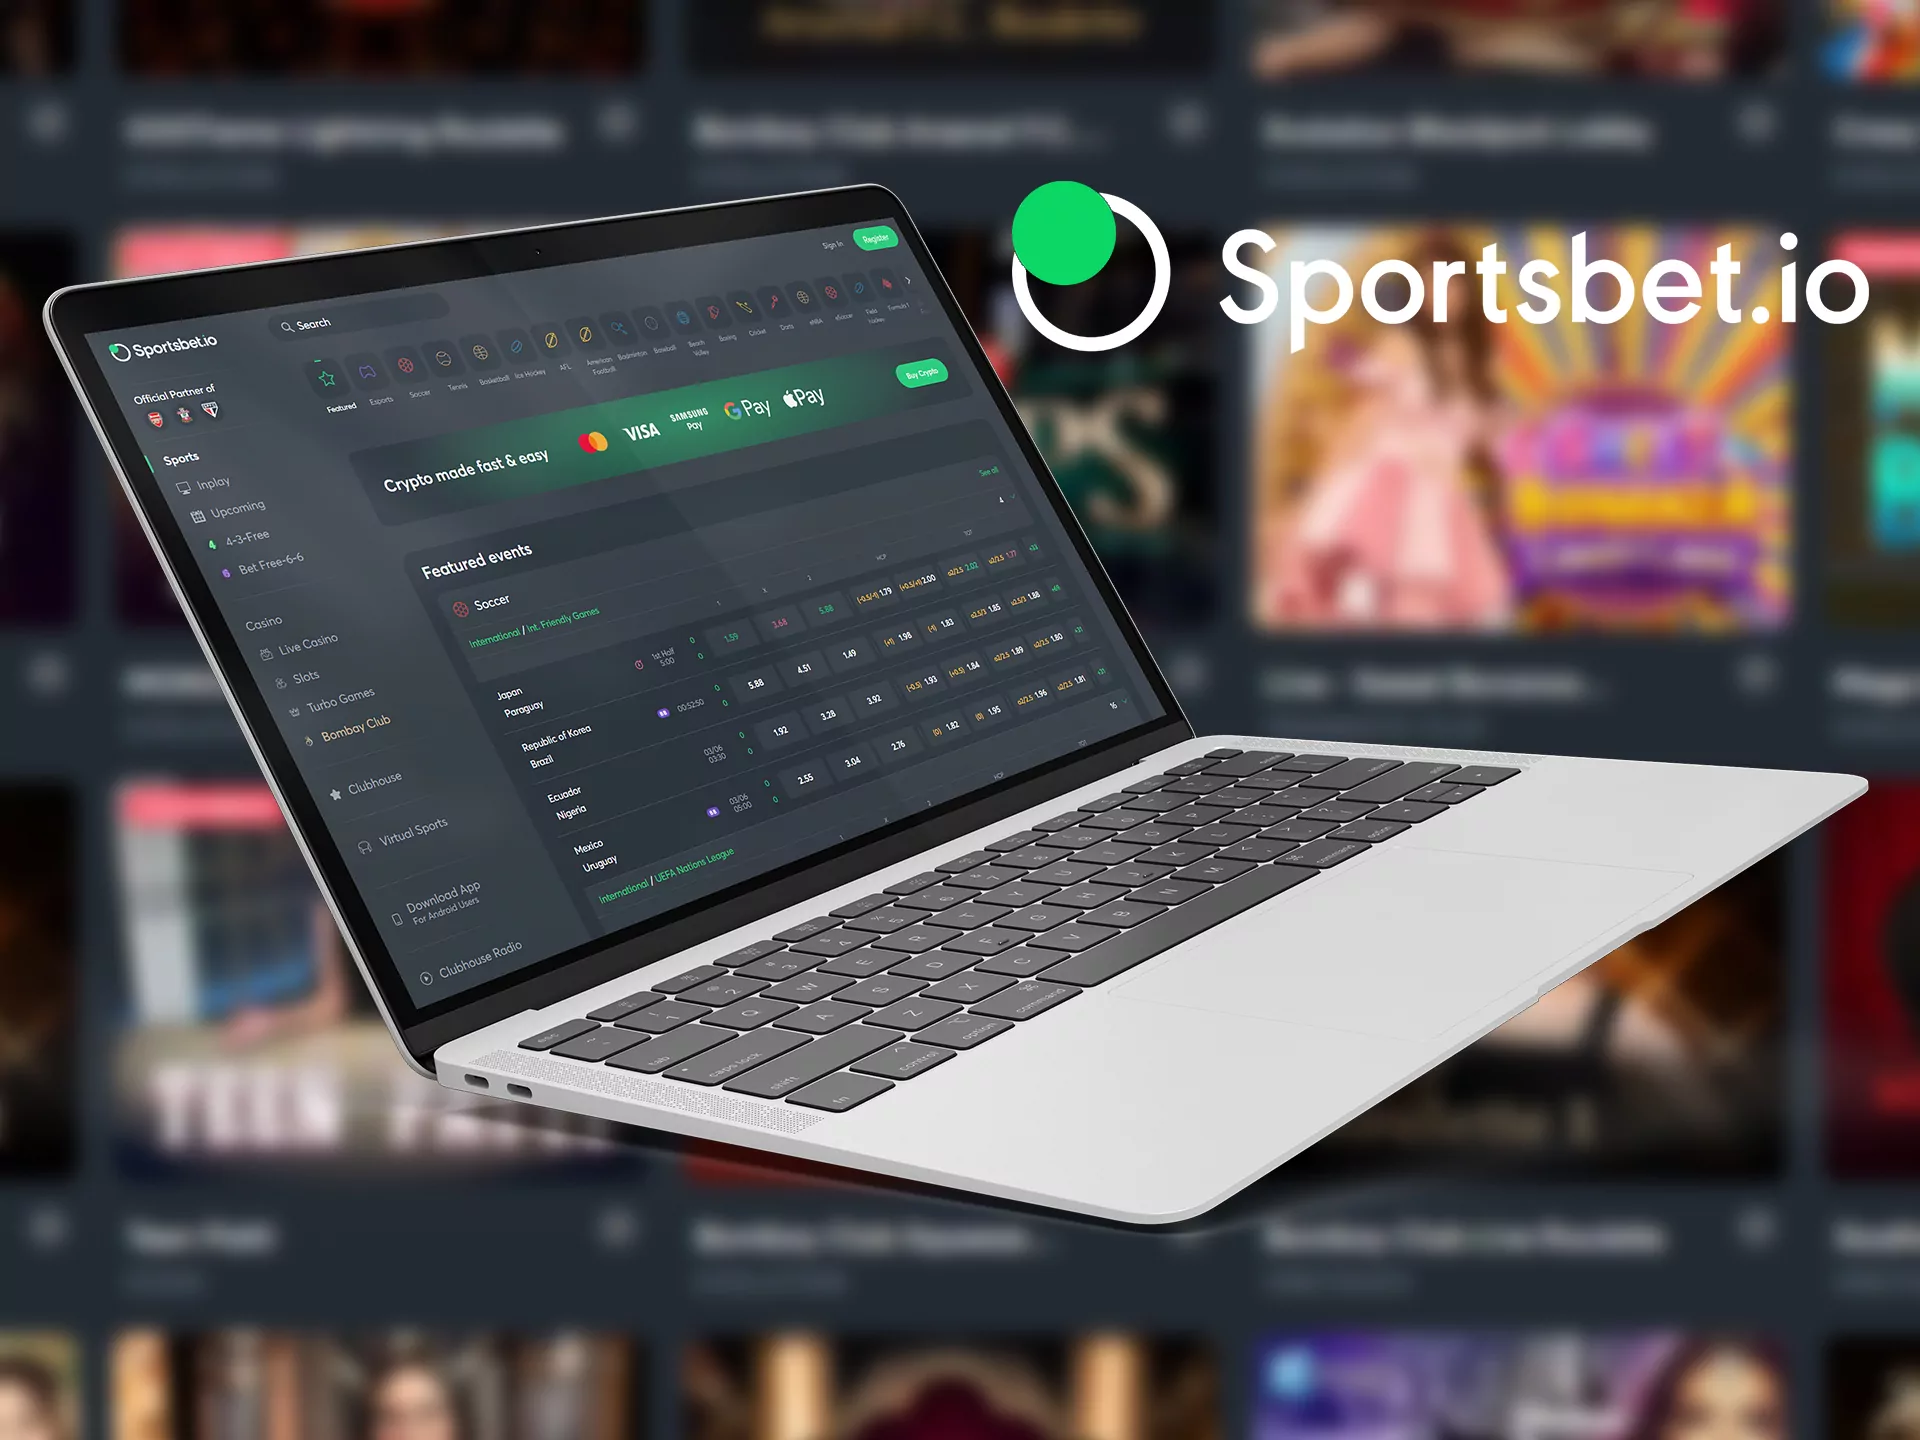 Install the Sportsbet app on your laptop.